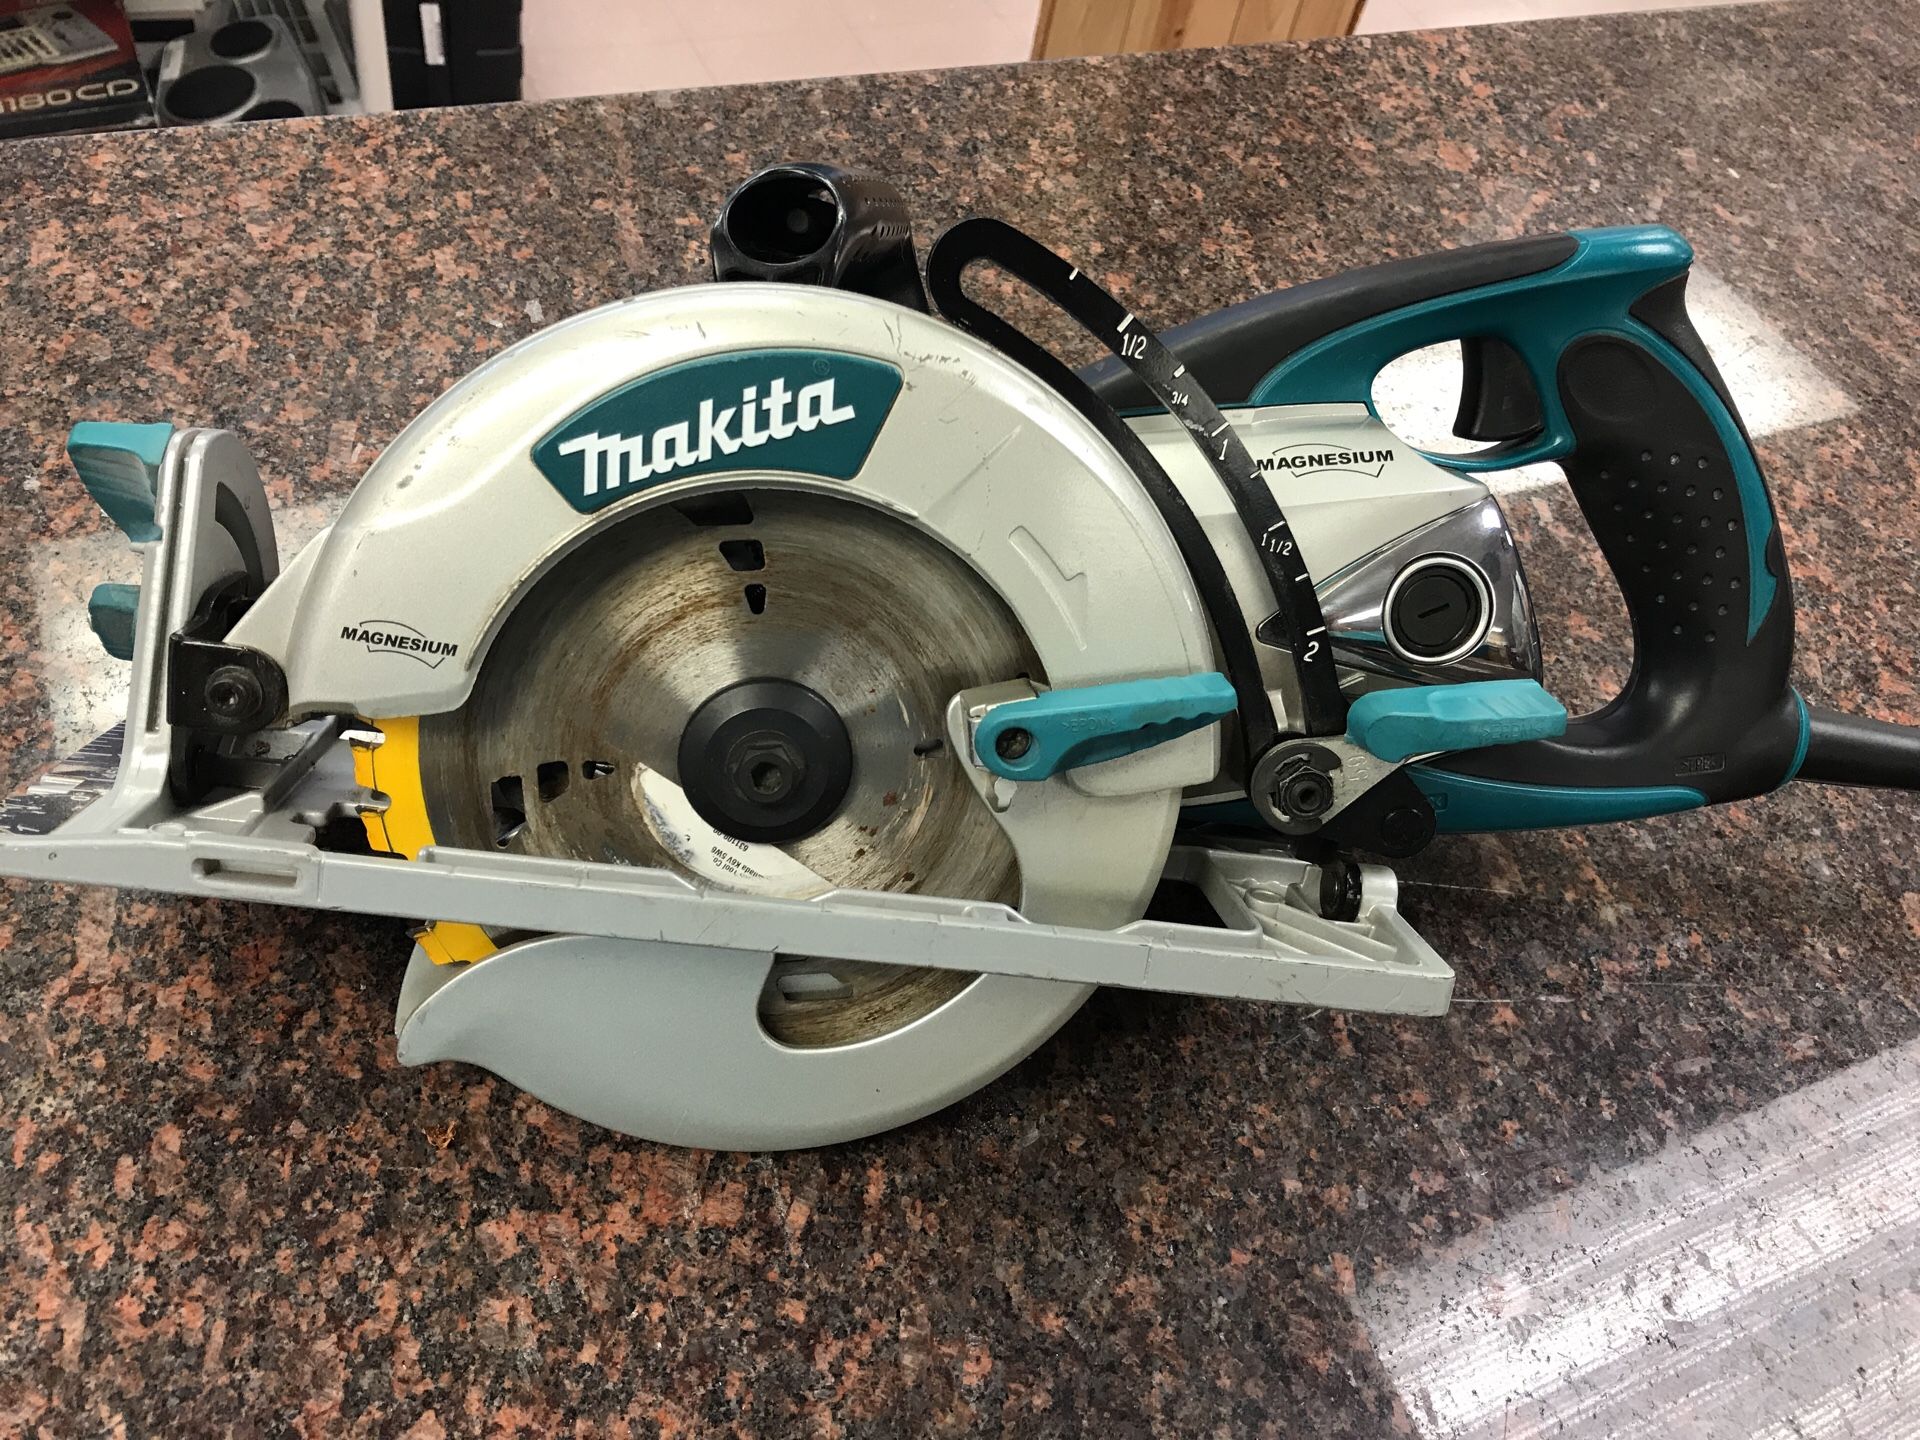 Makita 5377MG Magnesium 7-1/4-Inch Hypoid Saw for Sale in Austin, TX  OfferUp